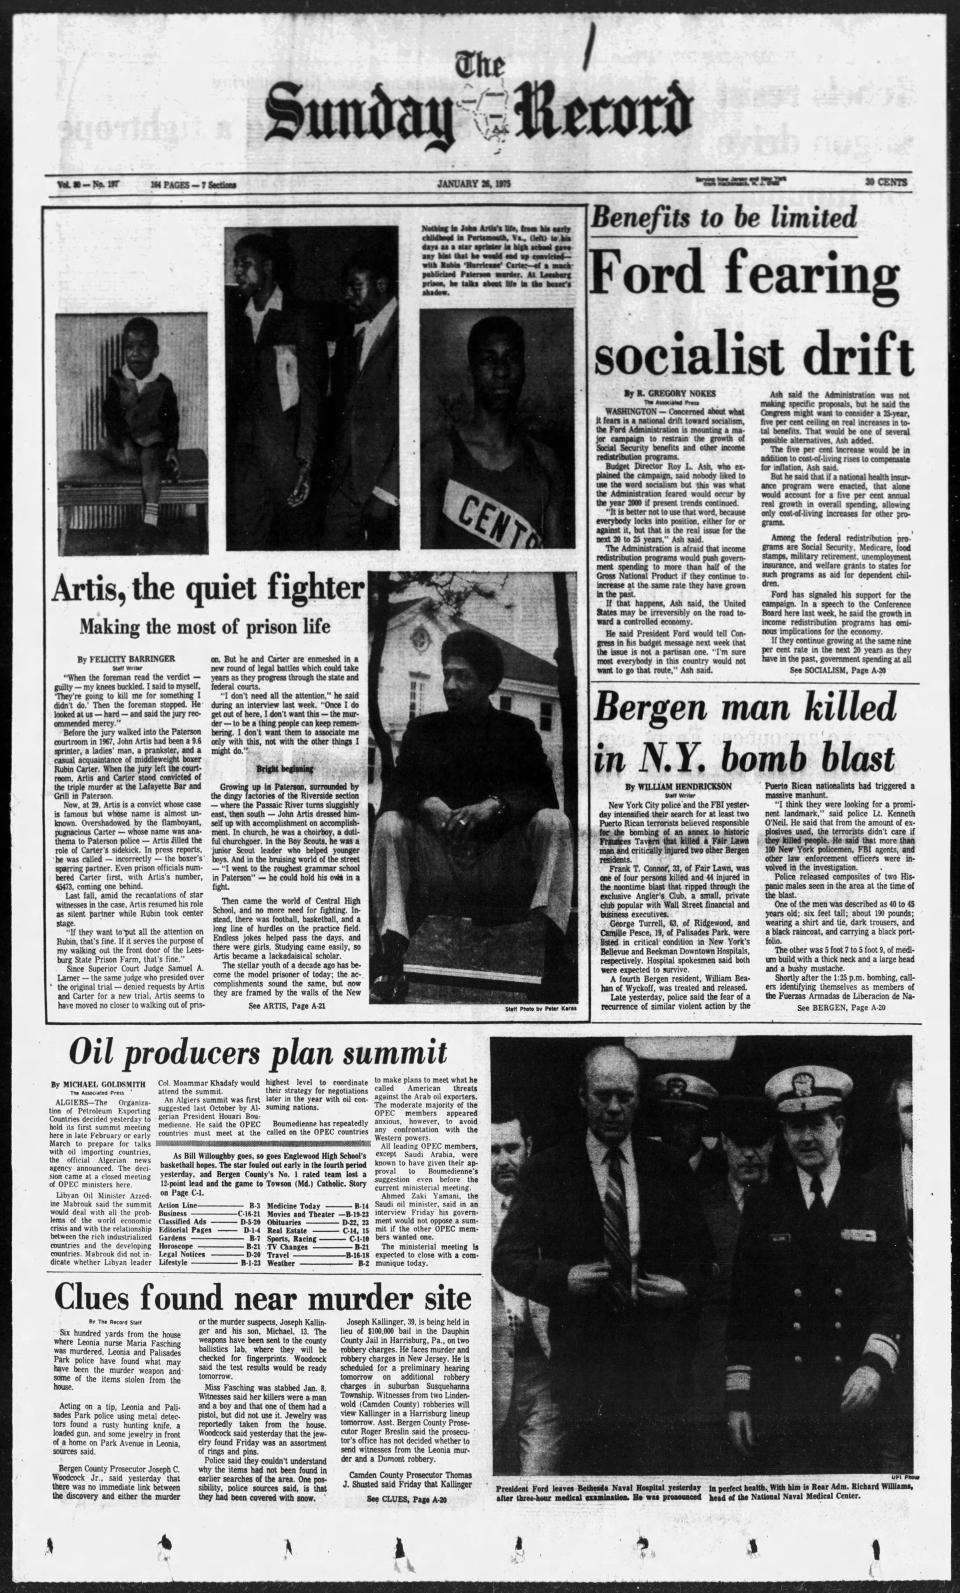 The front page of The Sunday Record for Sunday, Jan. 26, 1975 includes coverage of the Jan. 24, 1975 bombing of Fraunces Tavern in Lower Manhattan. The bombing, which killed four including Frank T. Connor, 33, of Fair Lawn, New Jersey, was conducted by group of Puerto Rican nationalists.